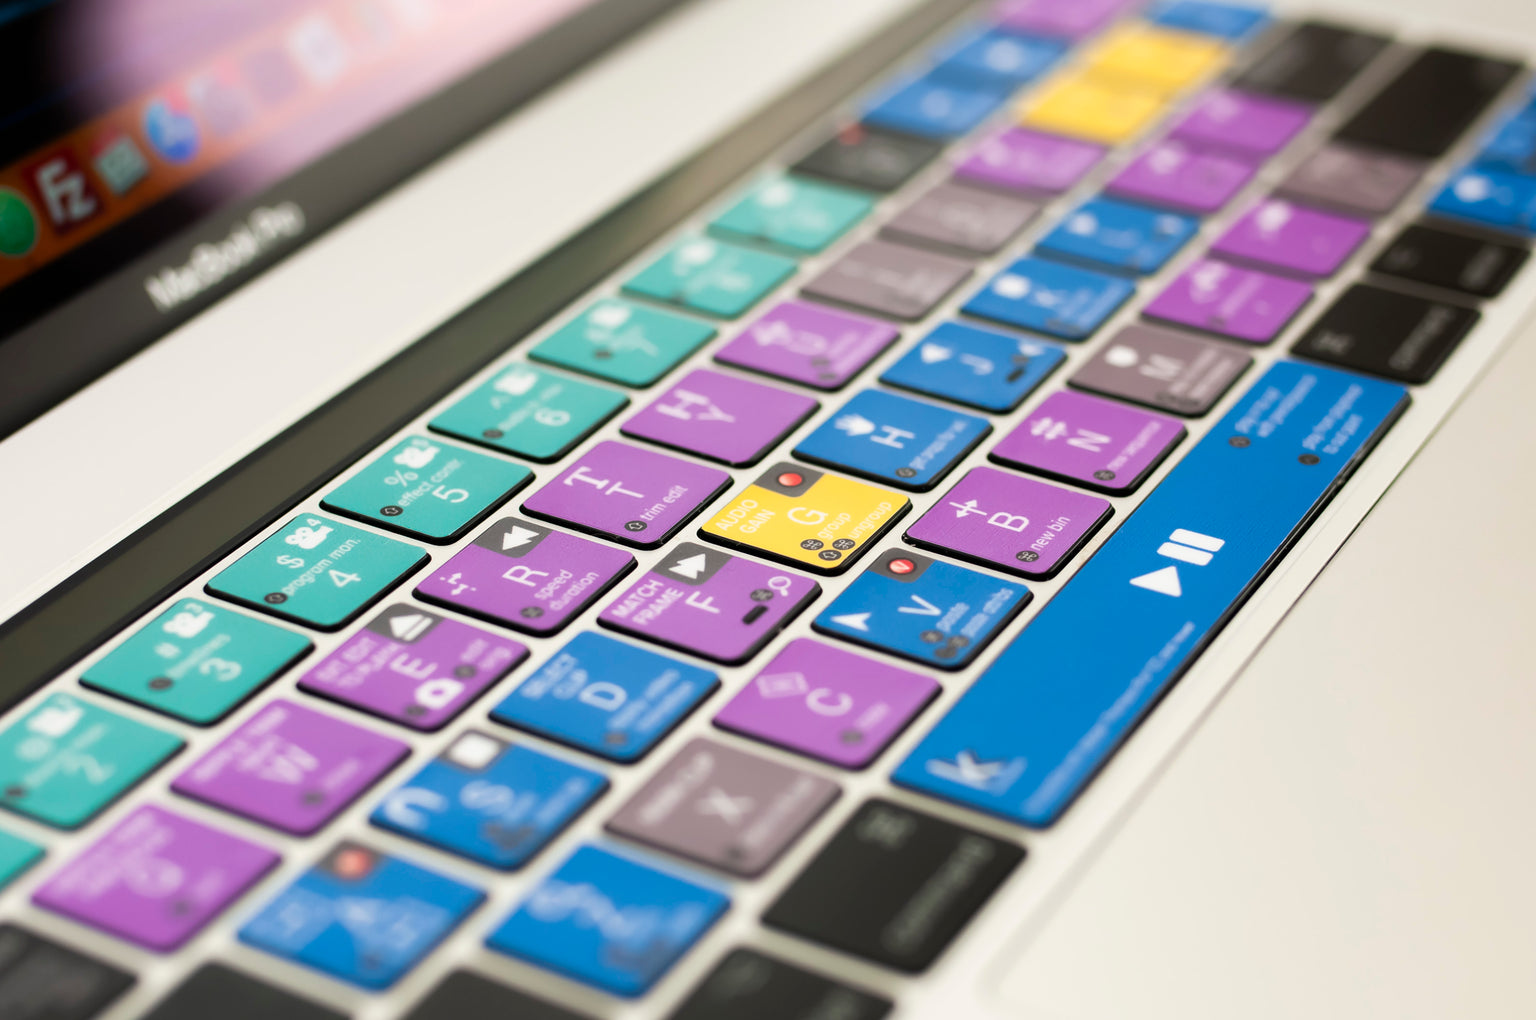 Adobe Premiere Pro Shortcuts on Keyboard Stickers - easy to type and quick video editing